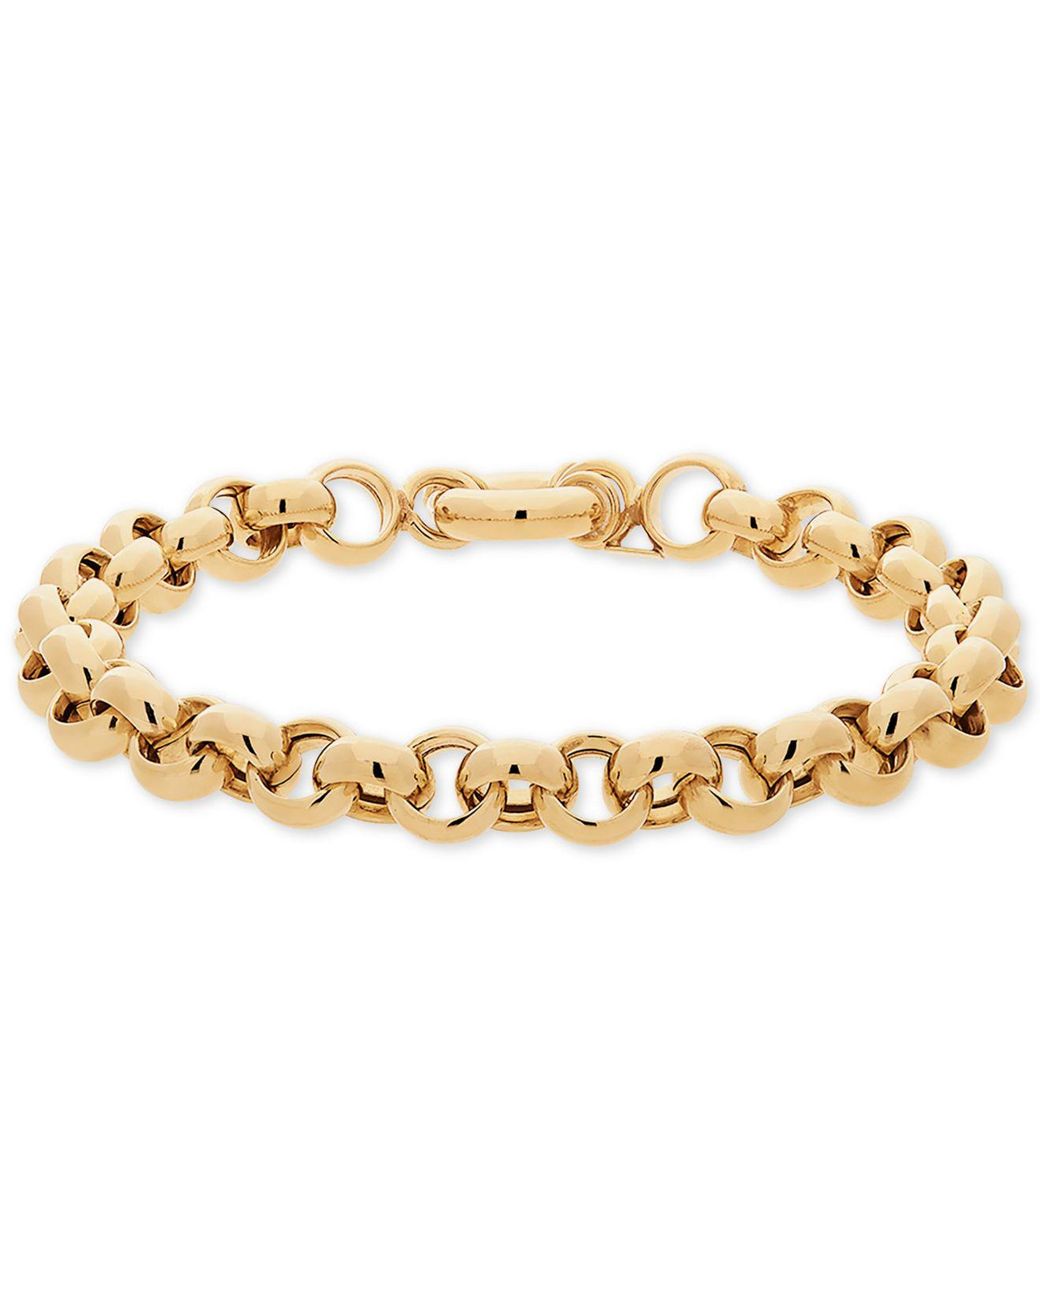 Macy's 3-Pc. Set Beaded, Torchon & Paperclip Cuff Bangle Bracelets in 14k  Gold-Plated Sterling Silver - Macy's